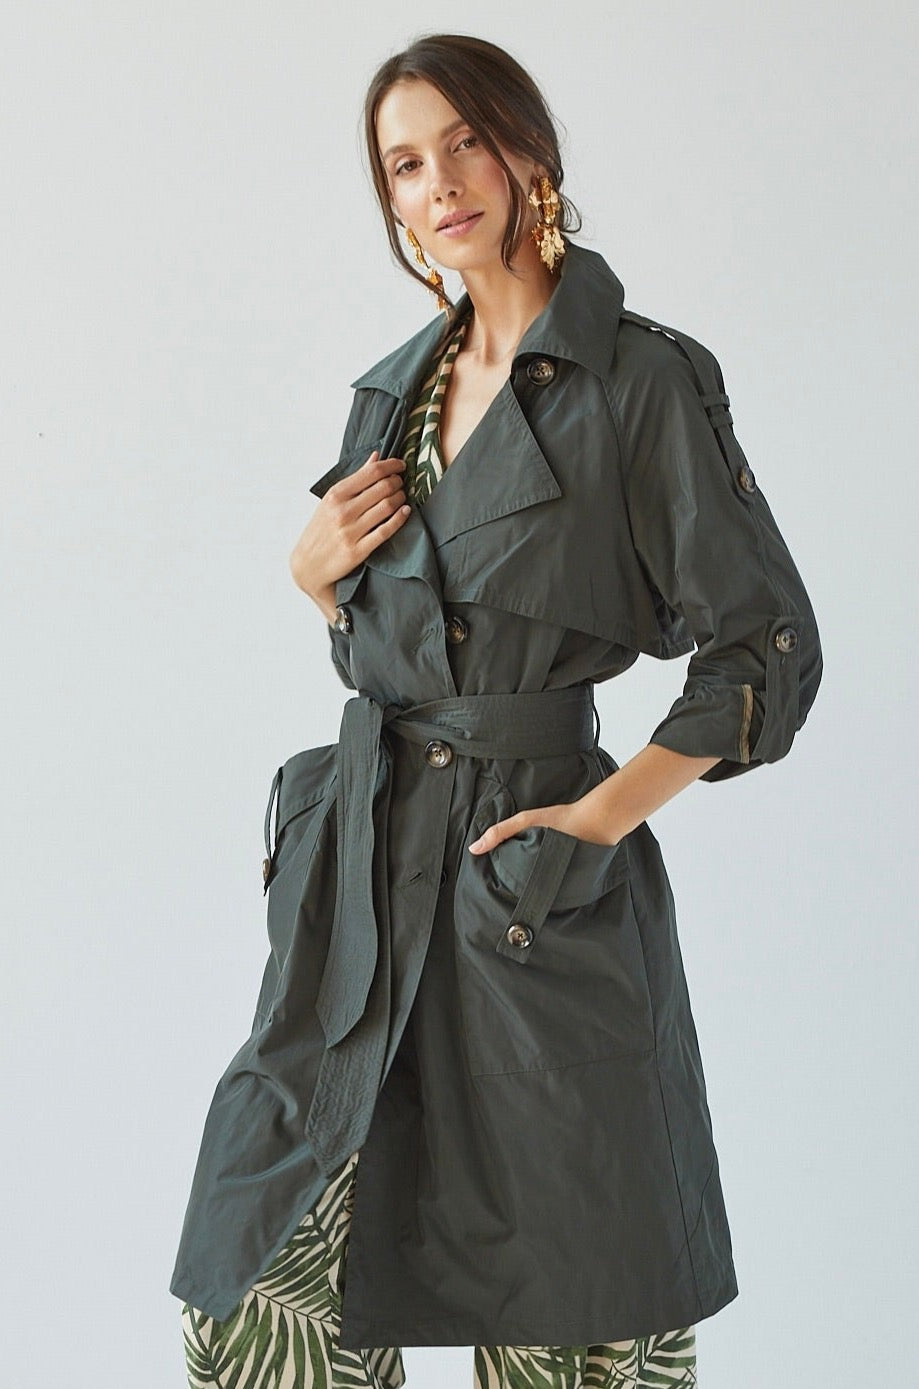 Raphael trench coat w/ rolled-up sleeve detail, patch pocket w/ cuff & sash